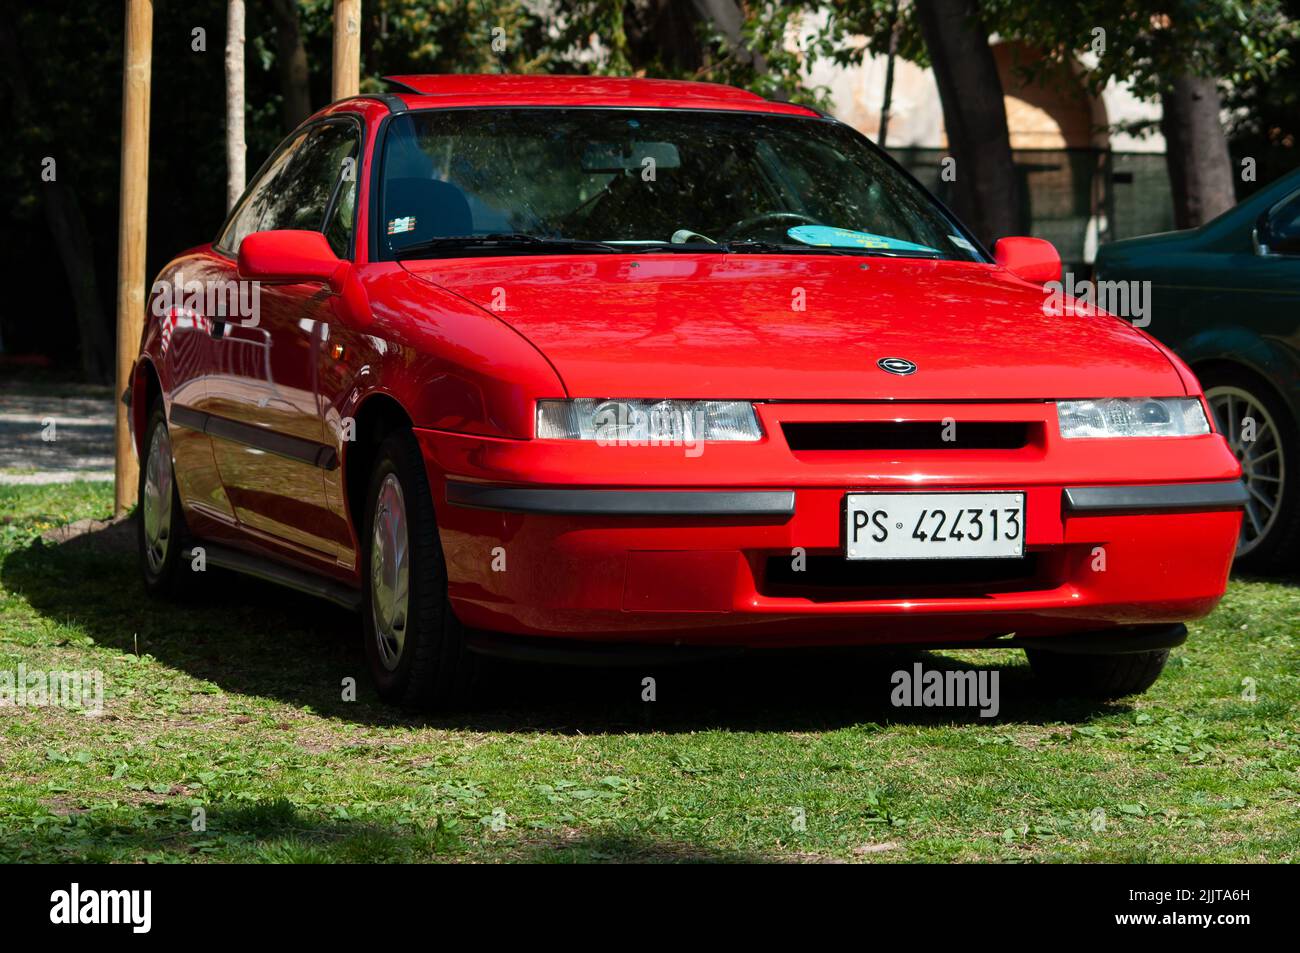 An old red Opel Calibra on display at a car show Stock Photo